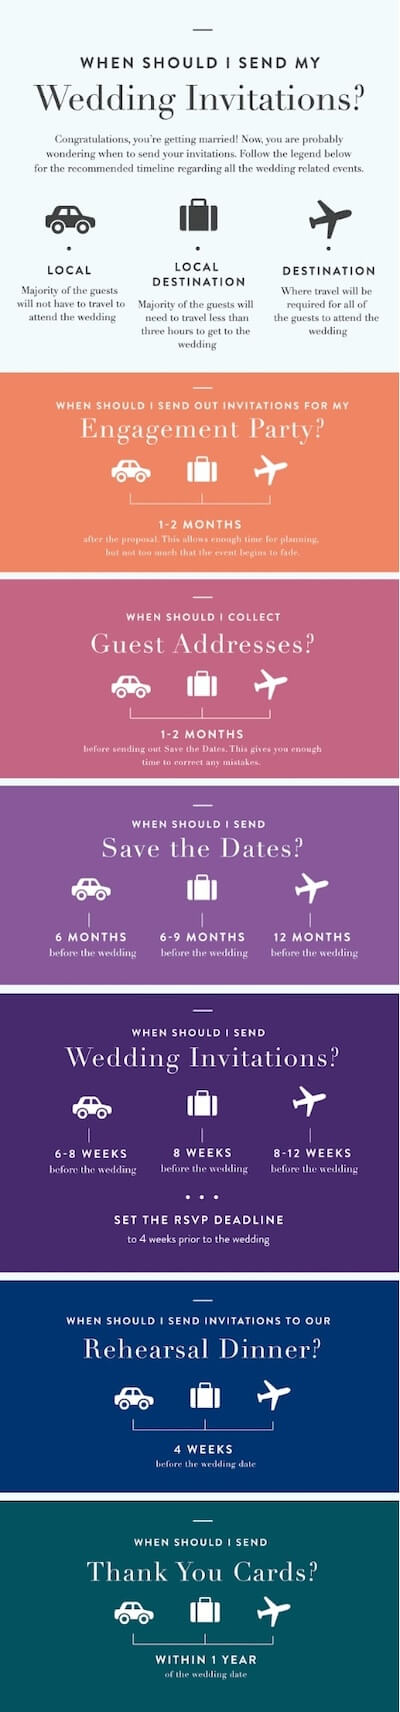 Infographic of a recommended timeline on when to send wedding invitations